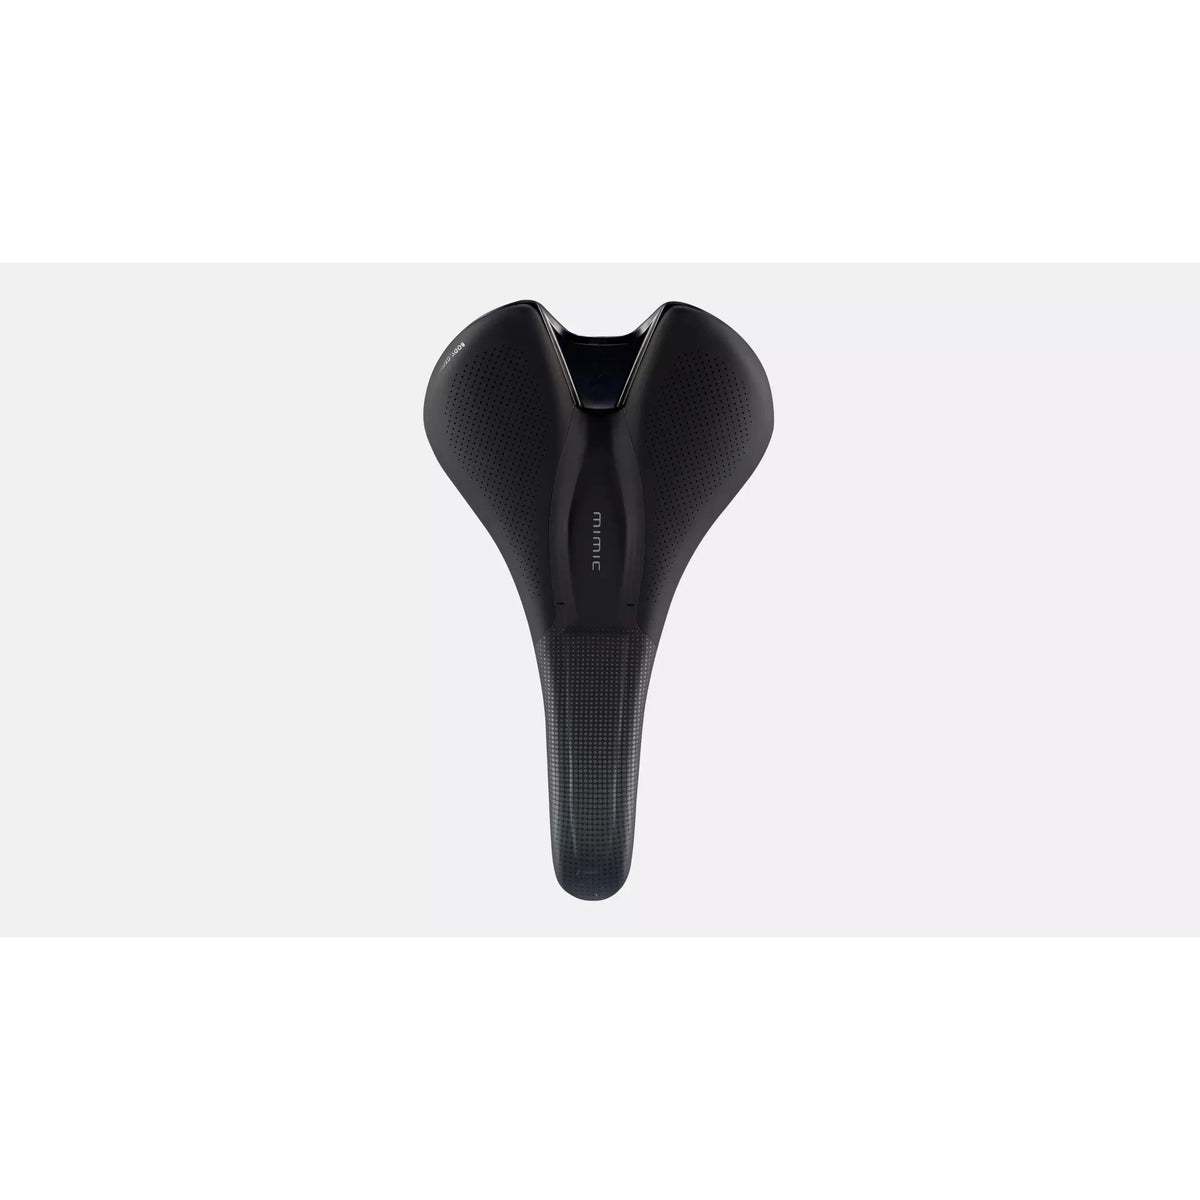 Specialized Romin Evo Expert Saddle With Mimic